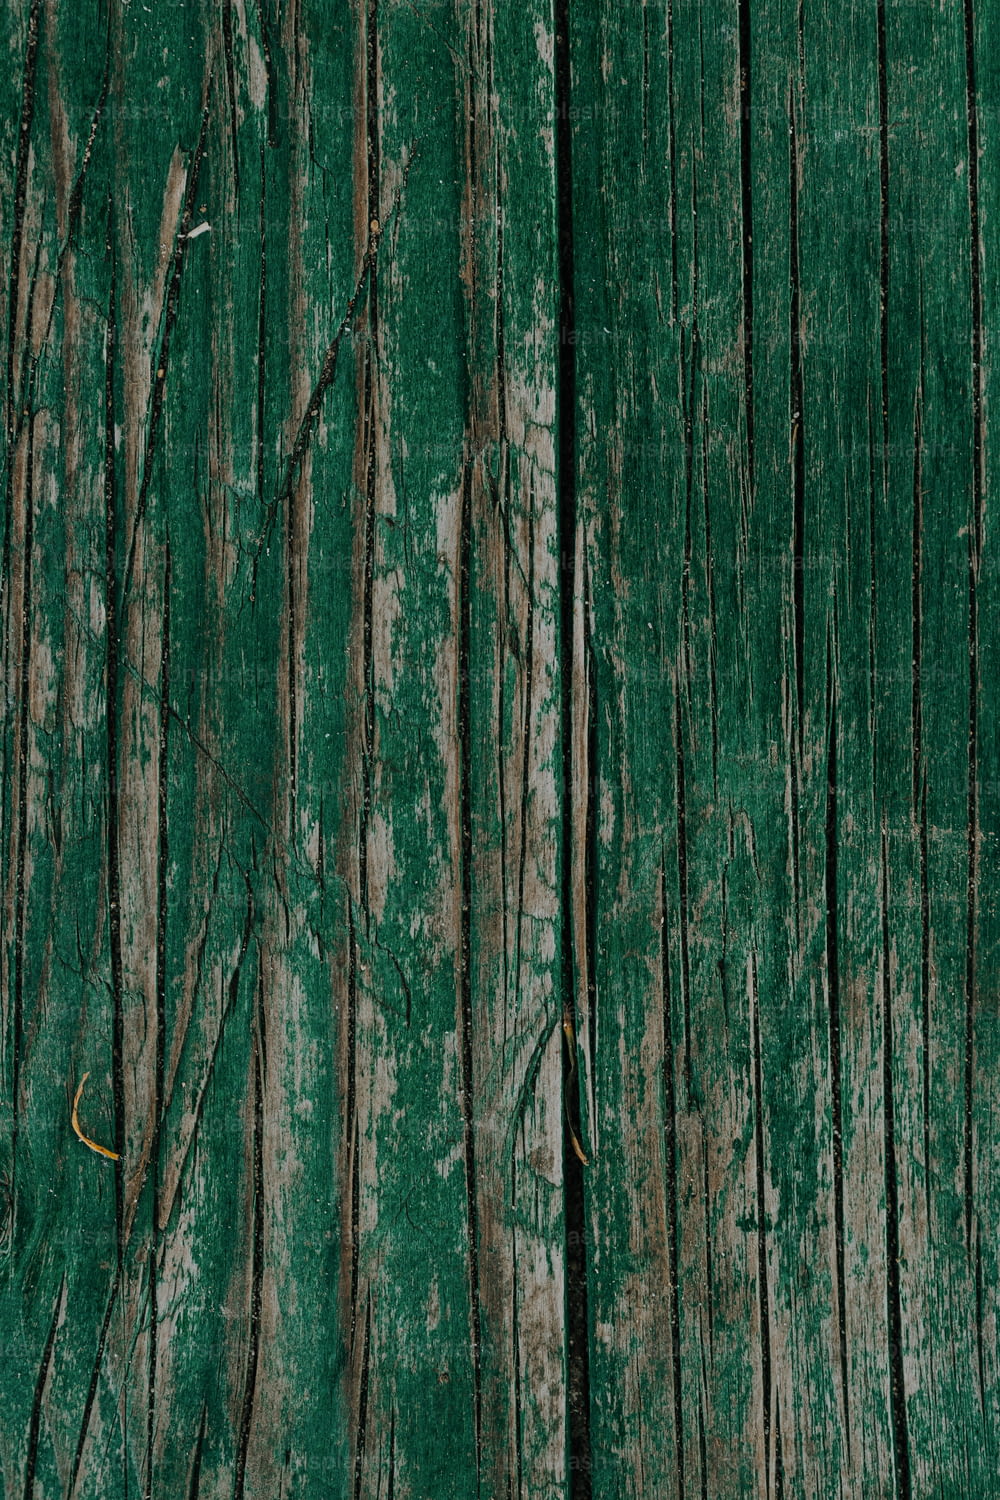 a close up of a green wooden surface